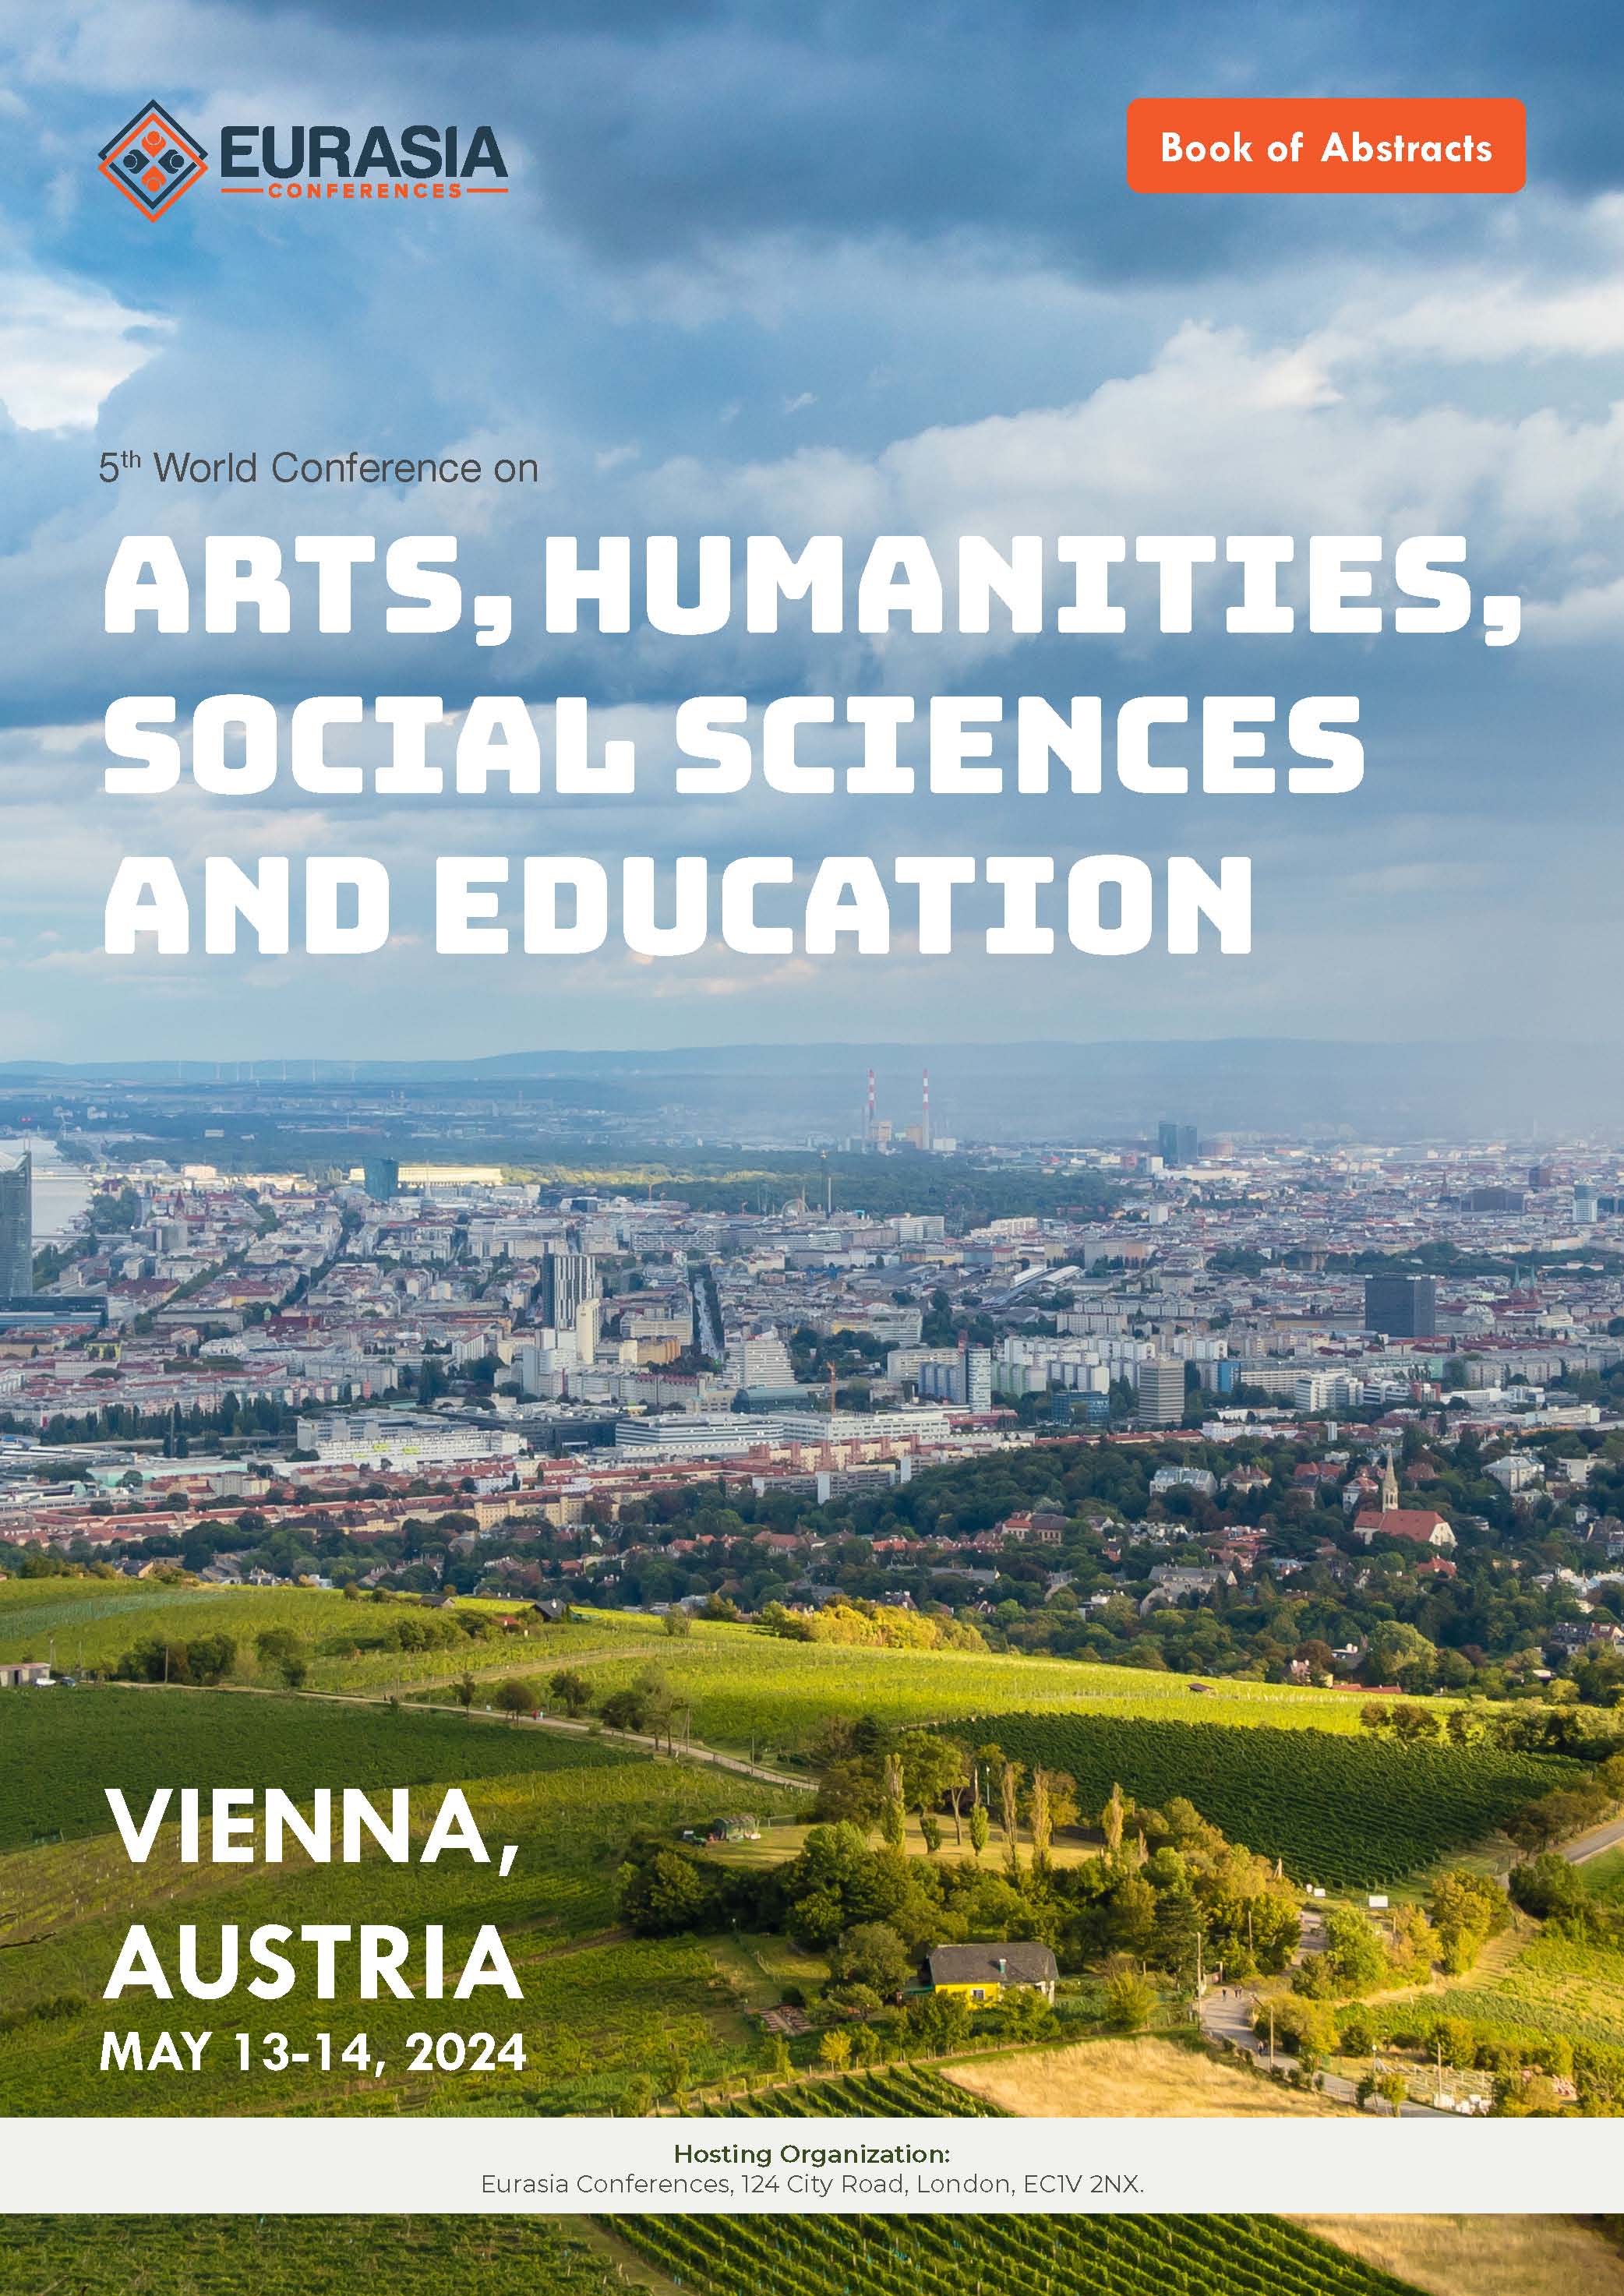 Abstracts of the 5th World Conference on Arts, Humanities, Social Sciences and Education